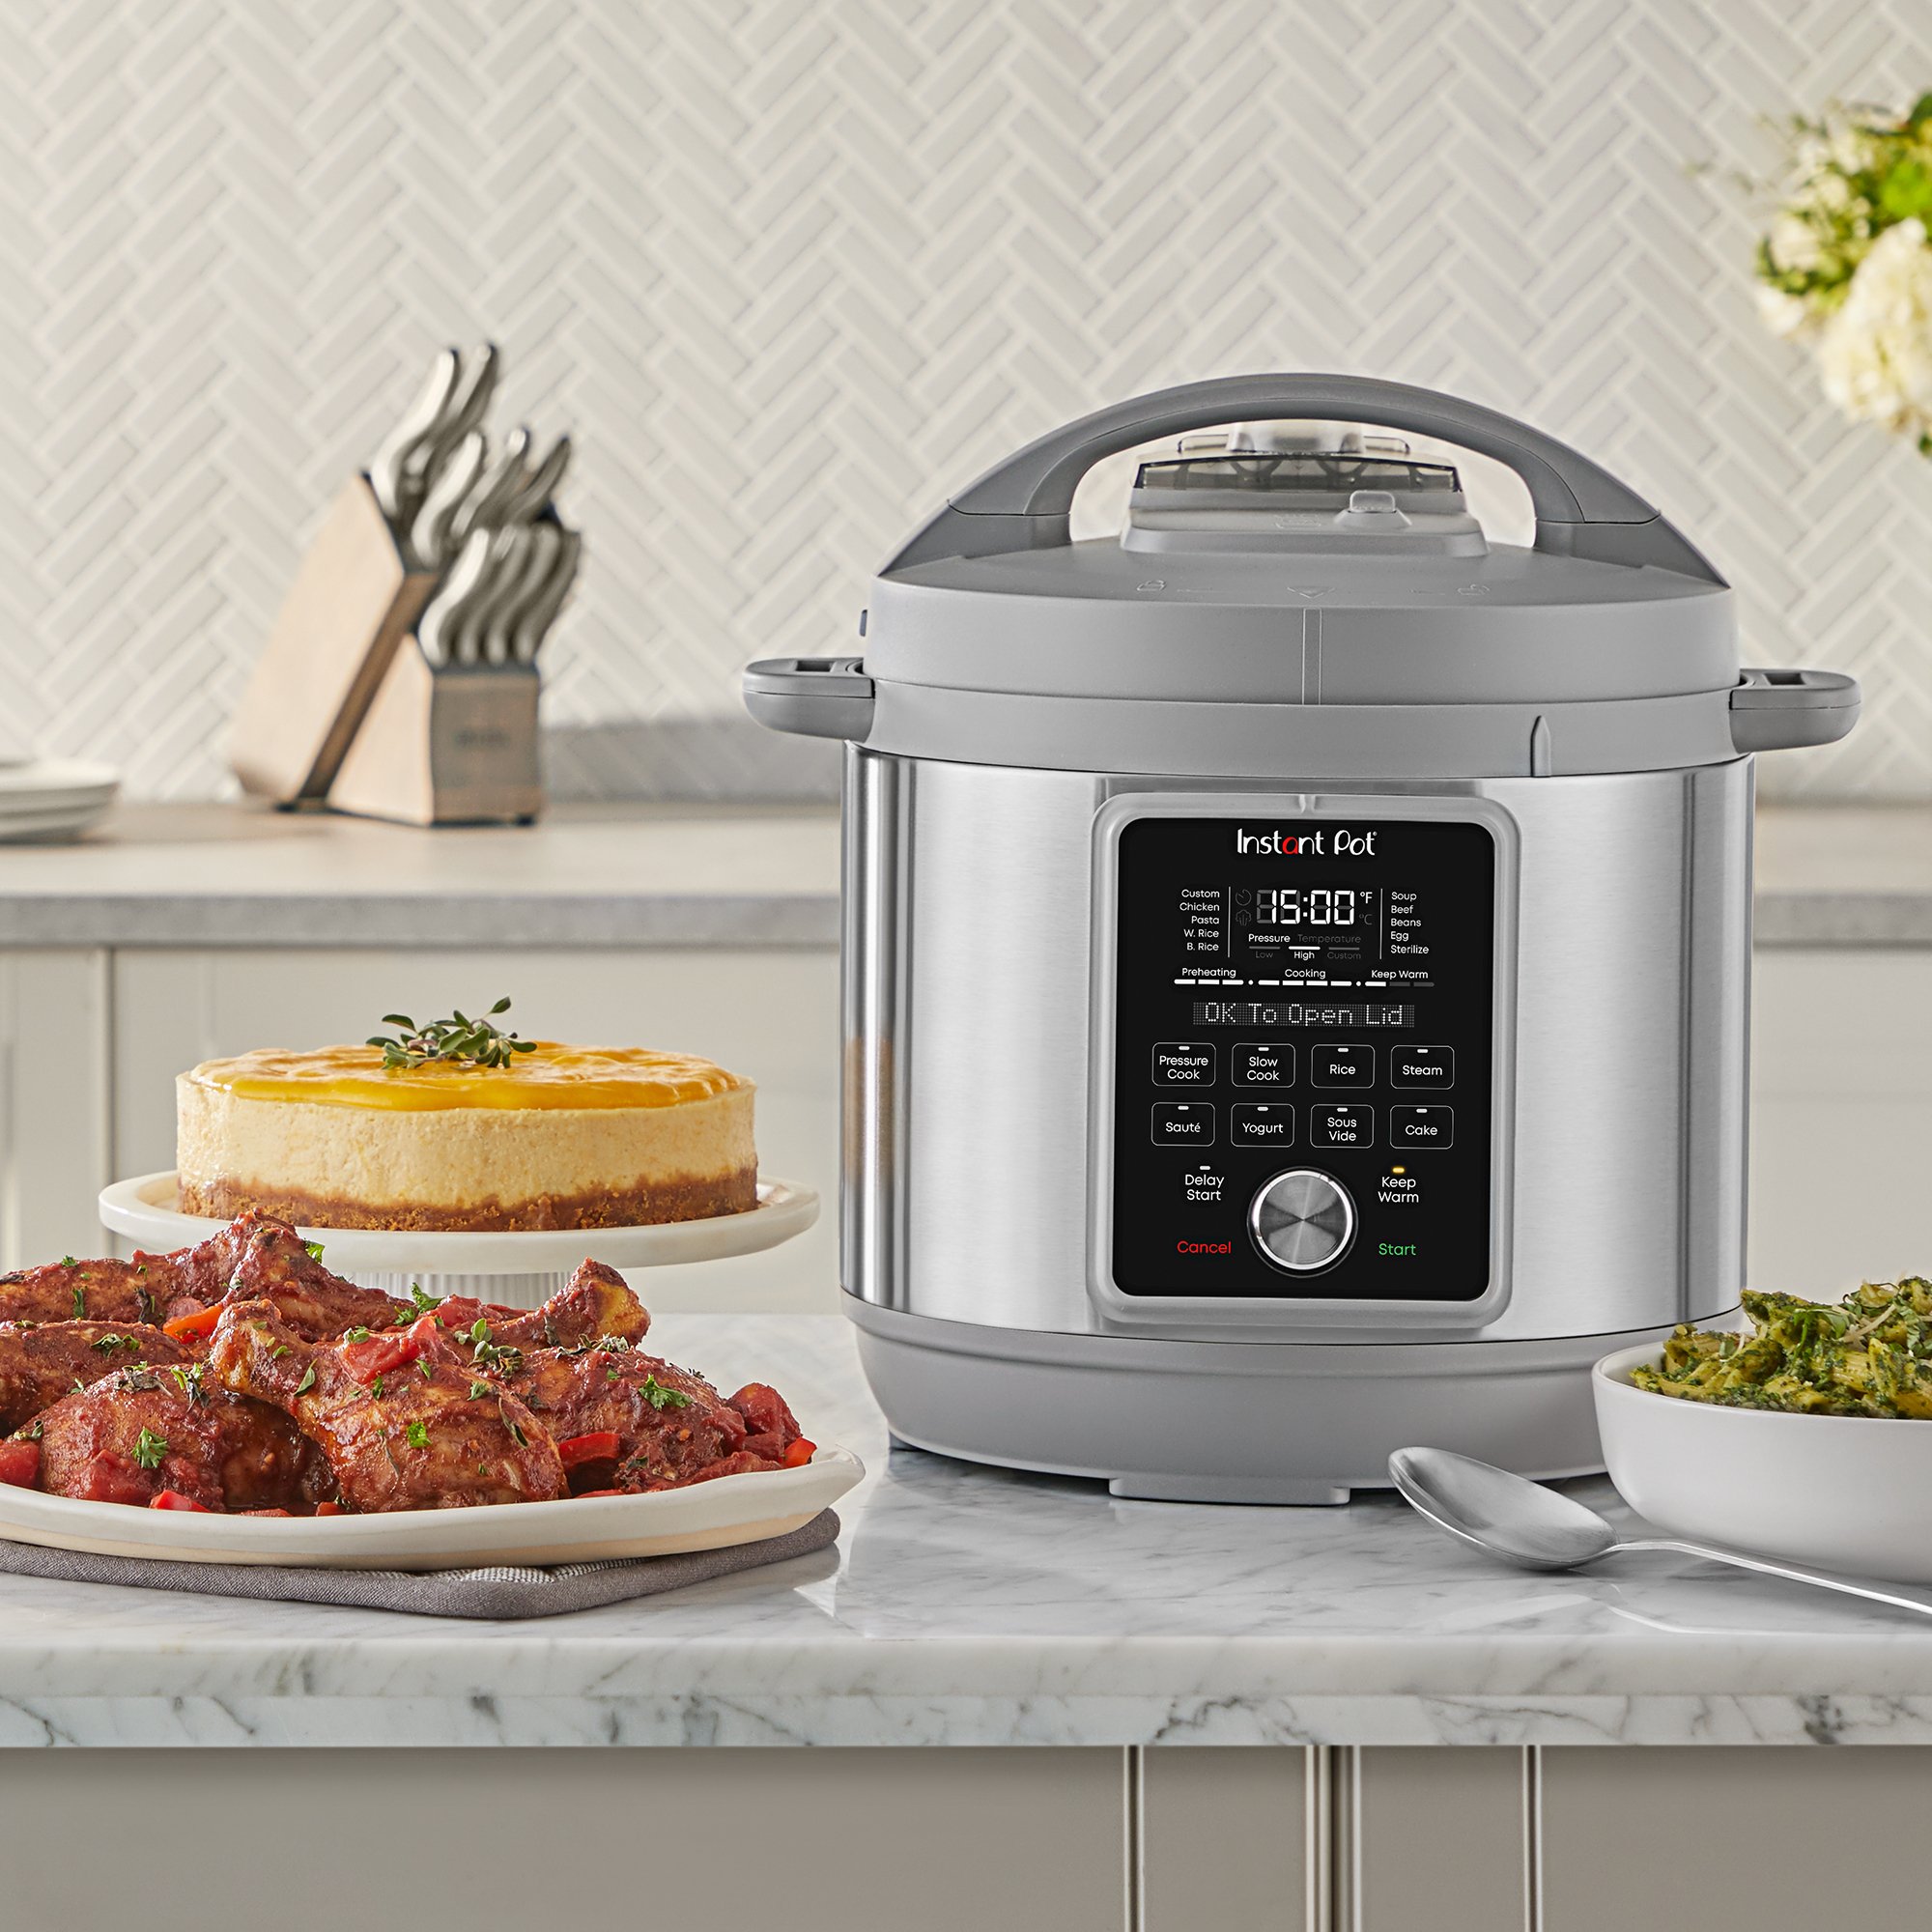 INSTANT POT Duo 60 7-in-1 Pressure Cooker - Shop Cookers & Roasters at H-E-B